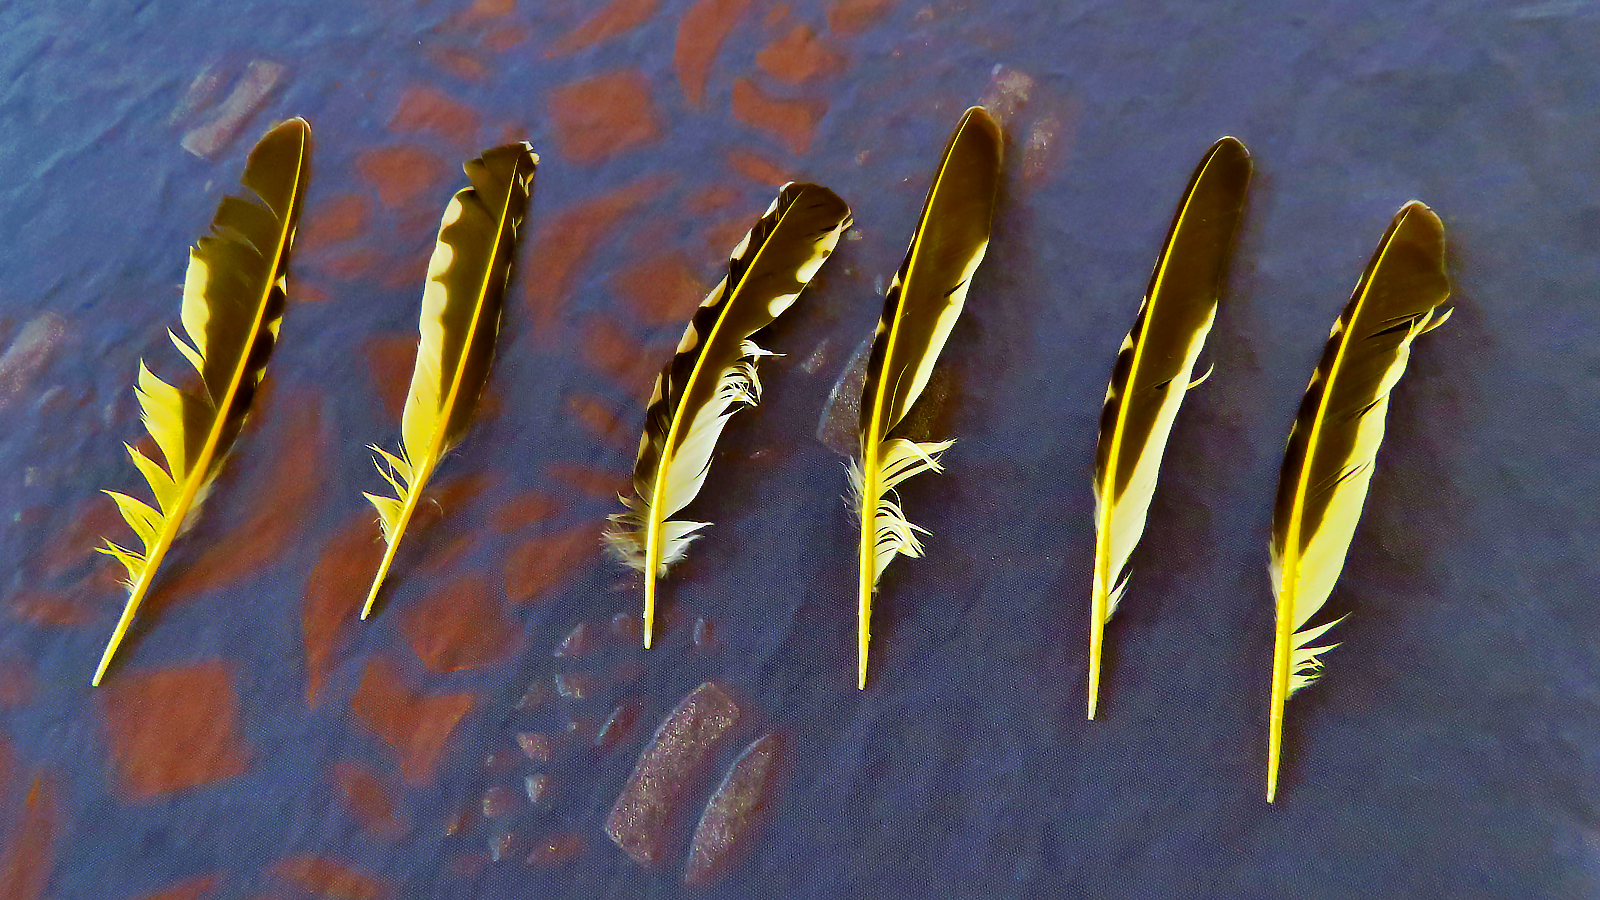 Yellow-Shafted Feathers